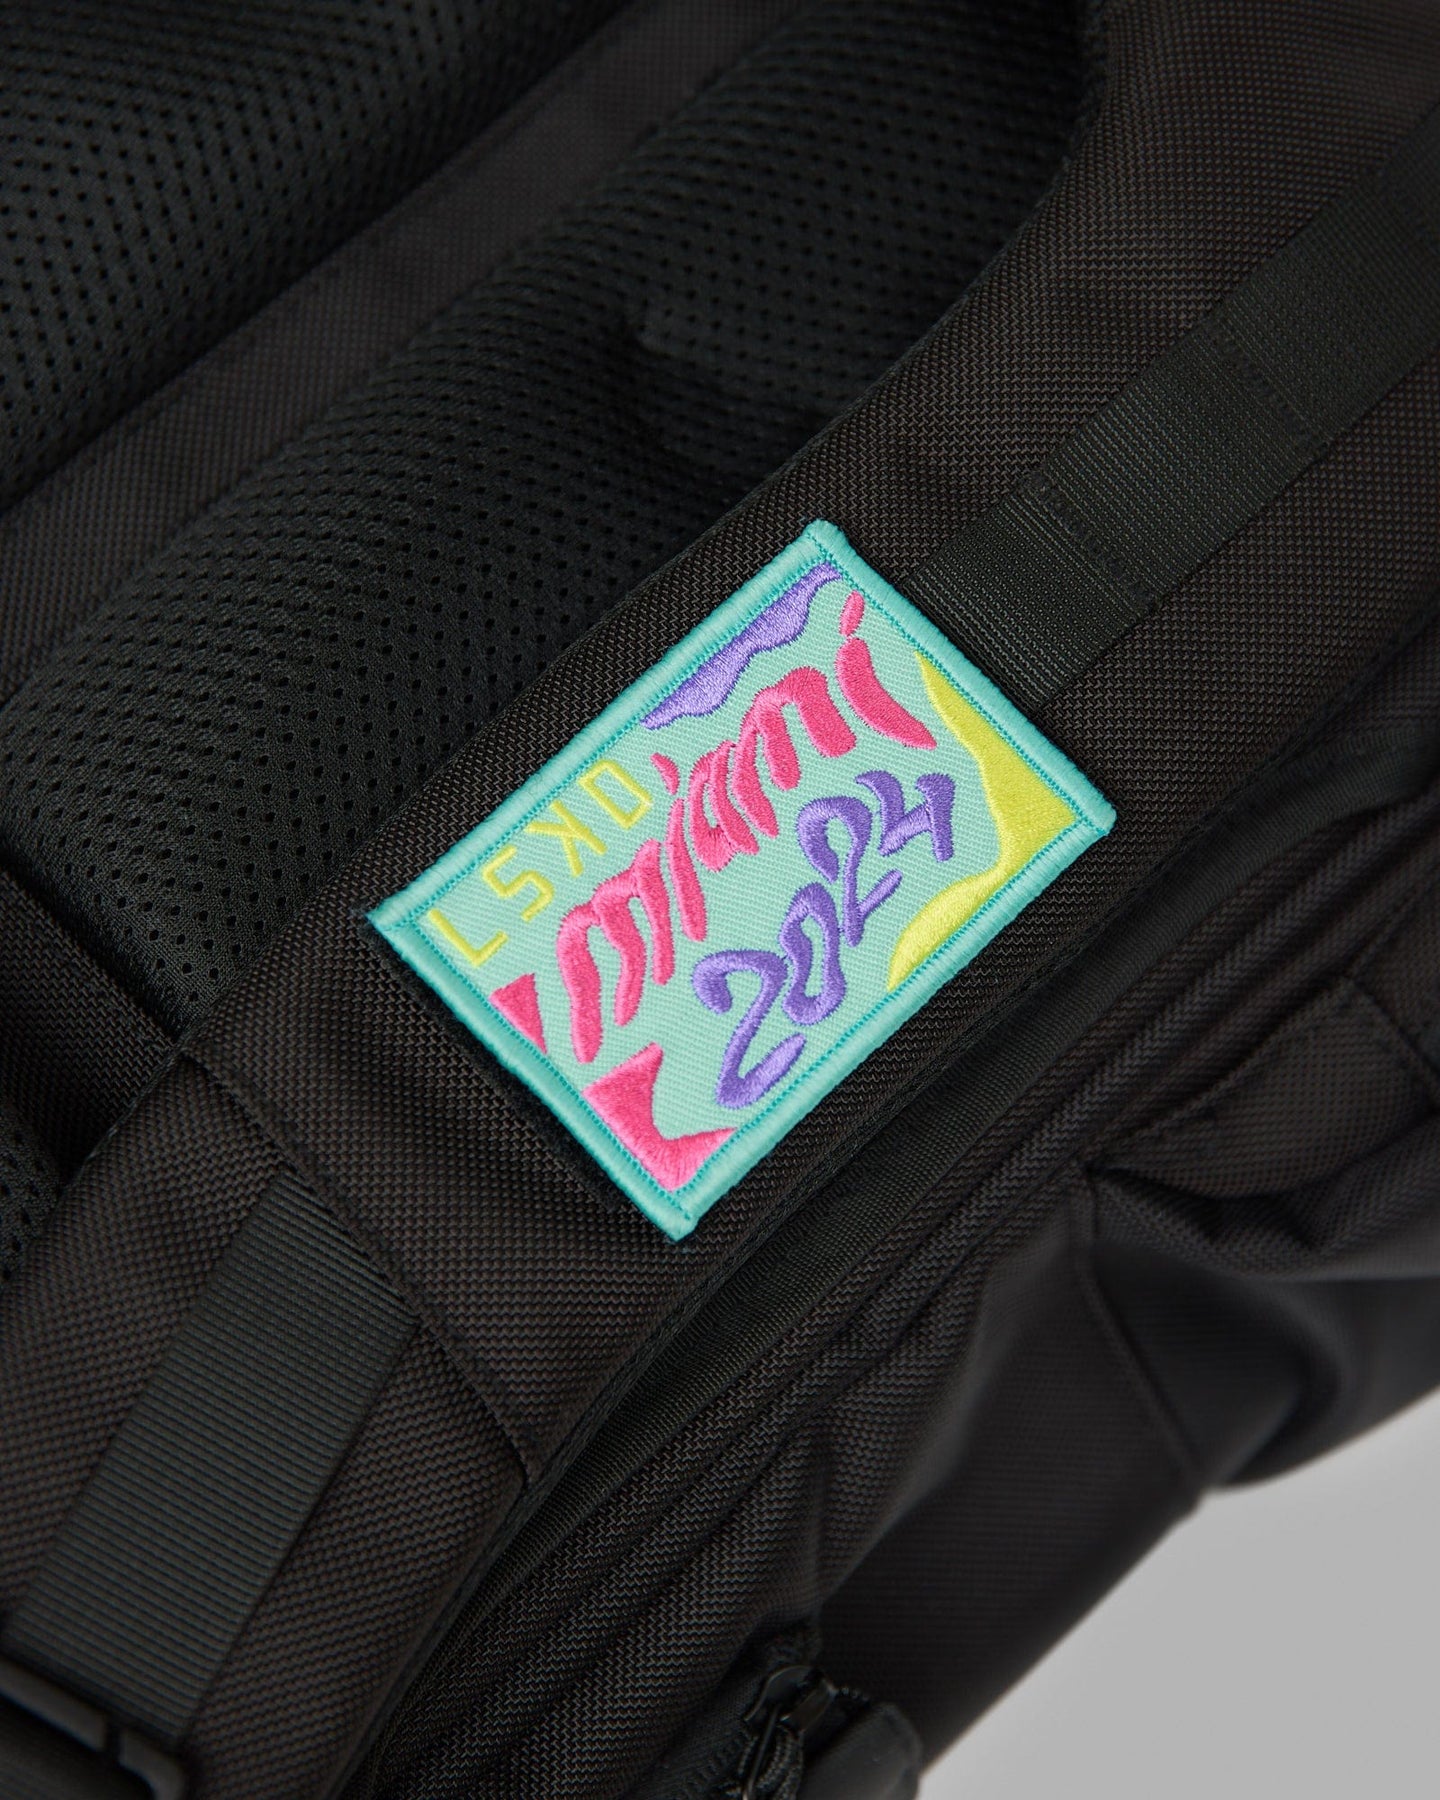 Miami24 Patches 3 Pack - Multi-White-Black | LSKD